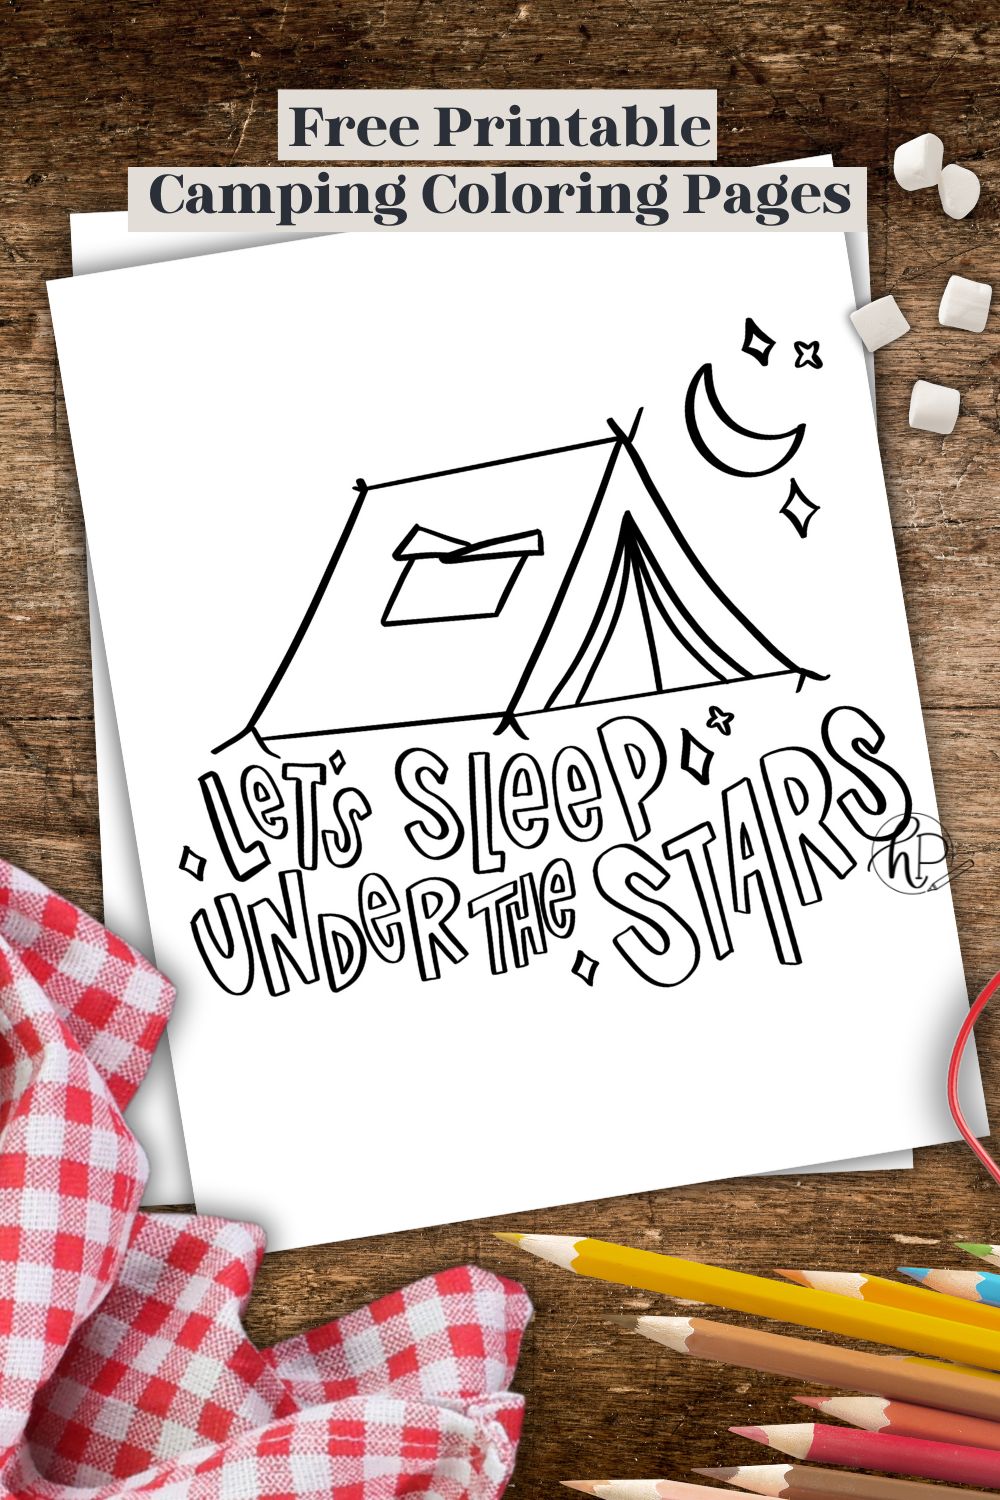 Let's sleep under the stars with tent and night sky coloring sheet printed in stack of coloring sheets on wooden table, surrounded by pencil crayons, a gingham table cloth and marshmallows. Text over reads free printable camping coloring pages